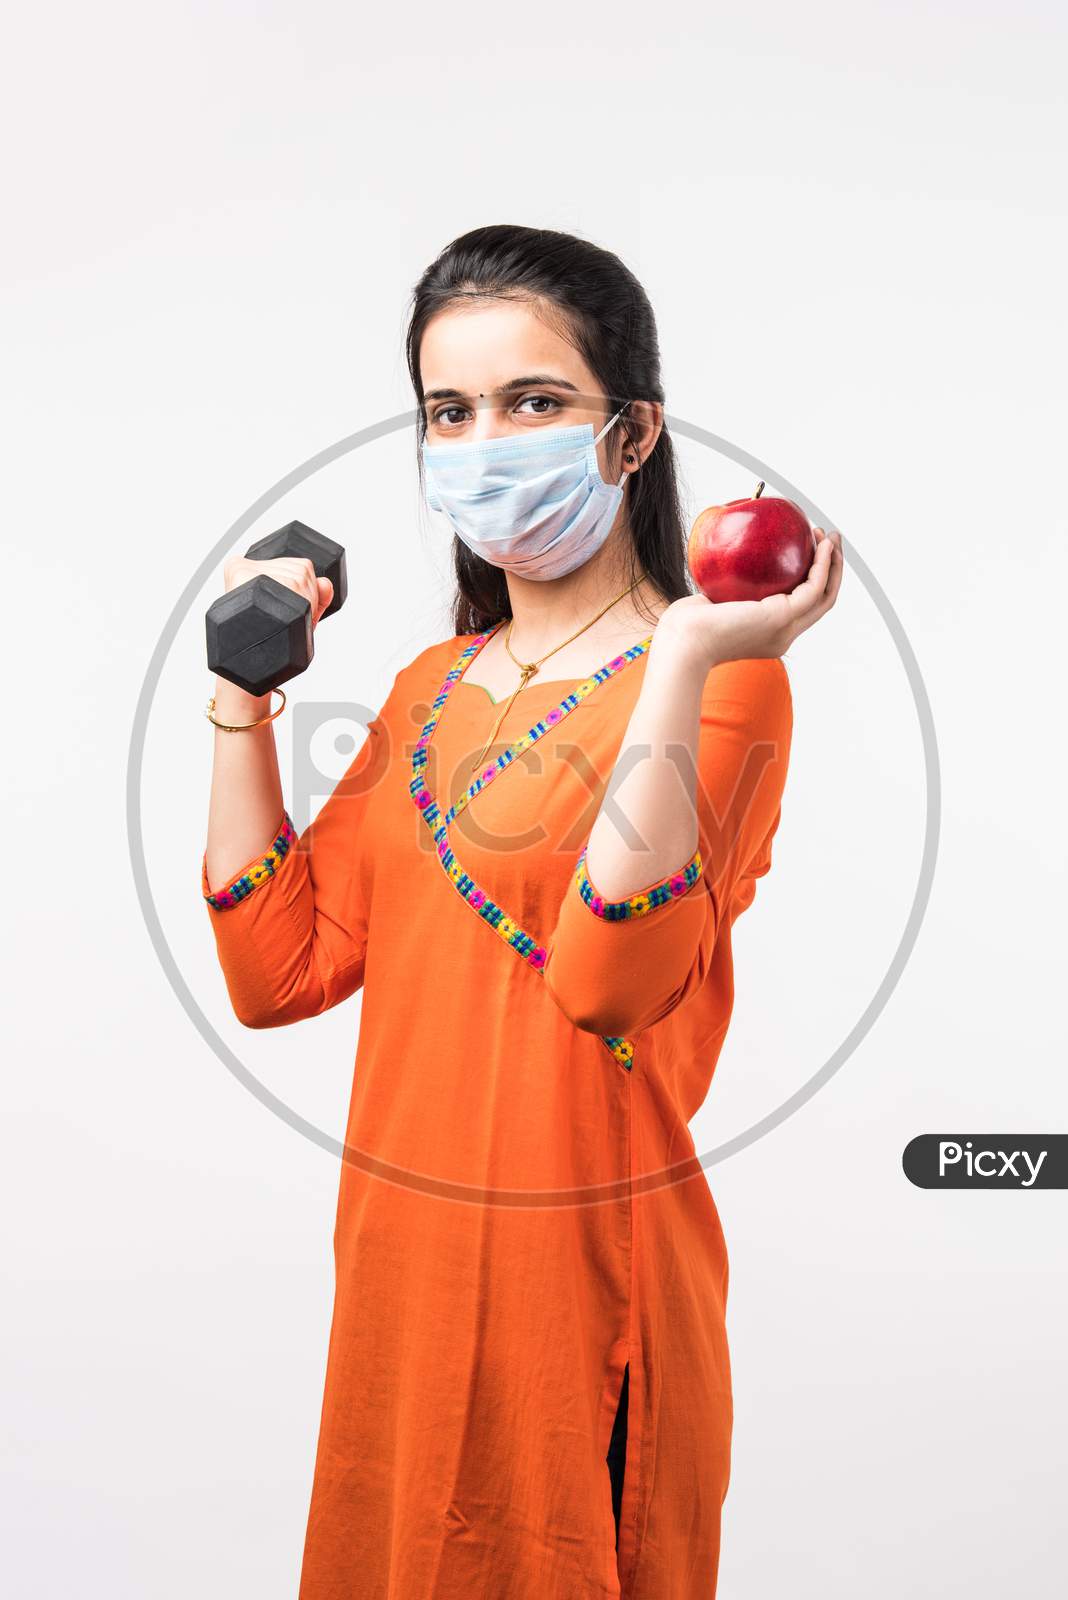 Indian Pretty Girl Exercising With Dumbbell And Showing Fresh Apple While Wearing Medical Face Mask